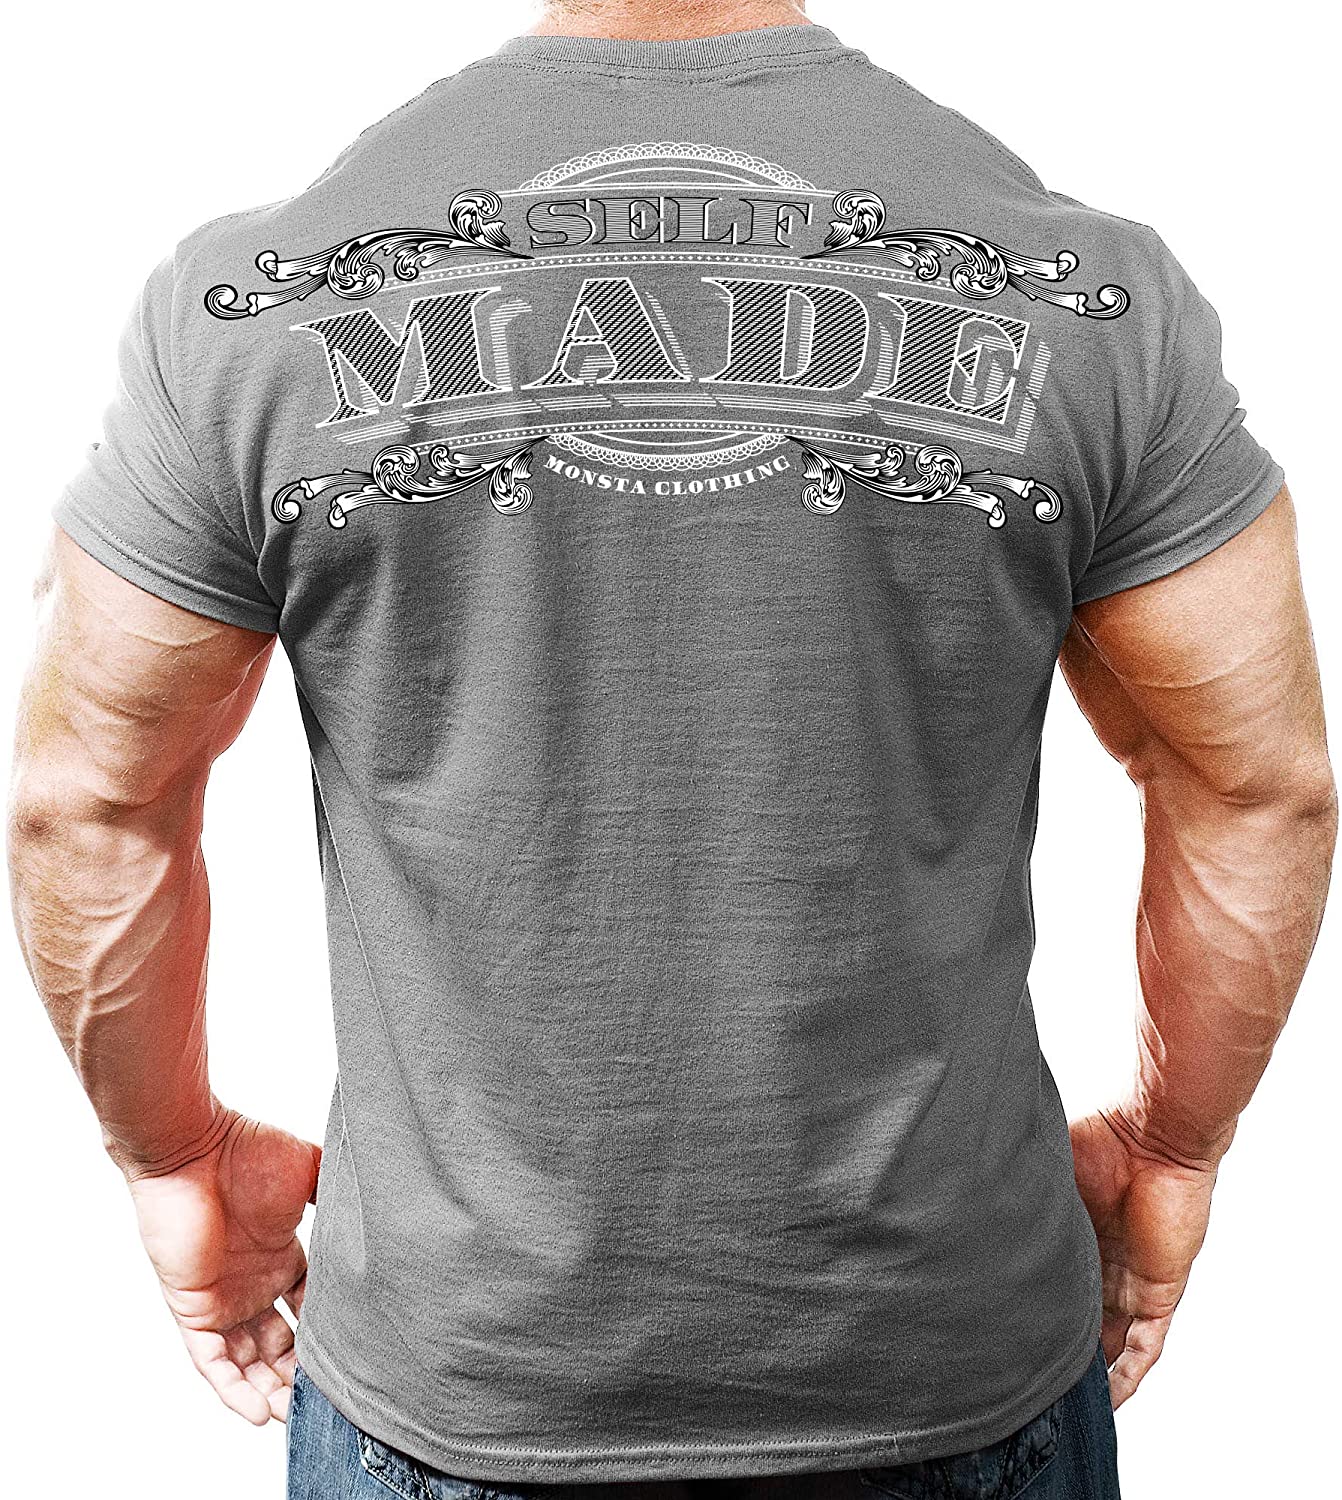 Self Made Men's Bodybuilding Workout Athletic Gym T-Shirt Monsta Clothing Co 